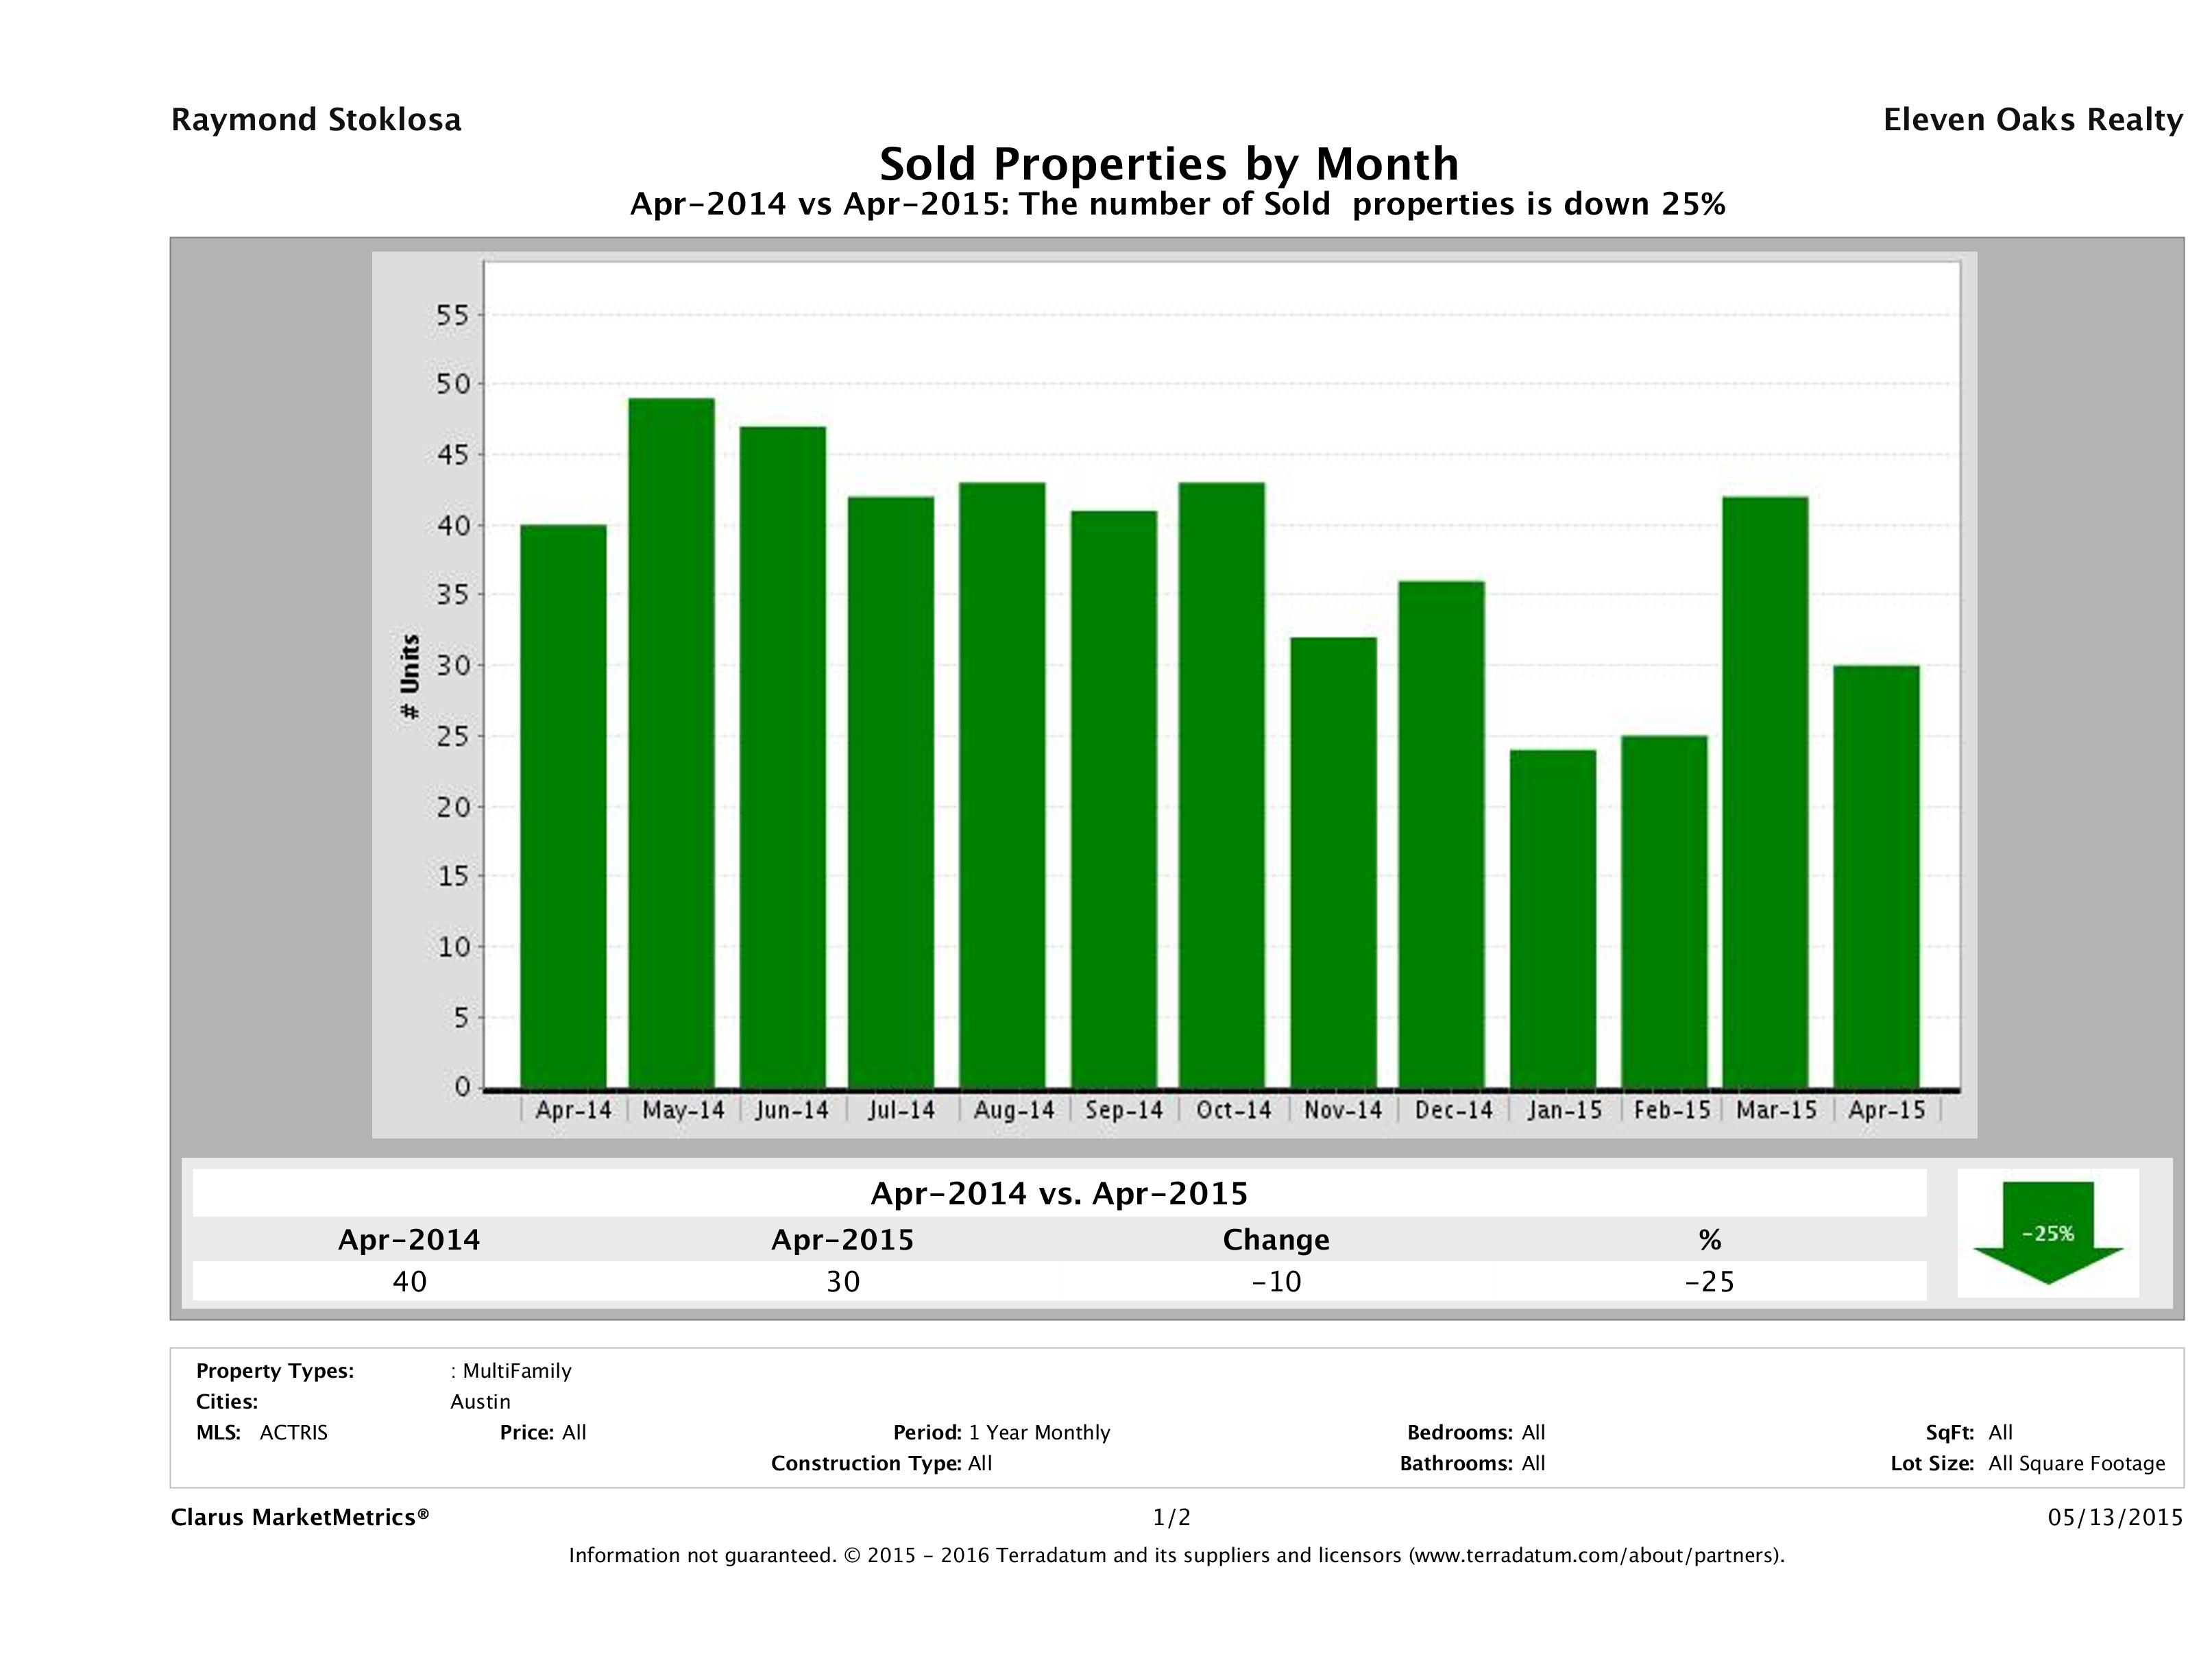 Austin number of multi family properties sold April 2015